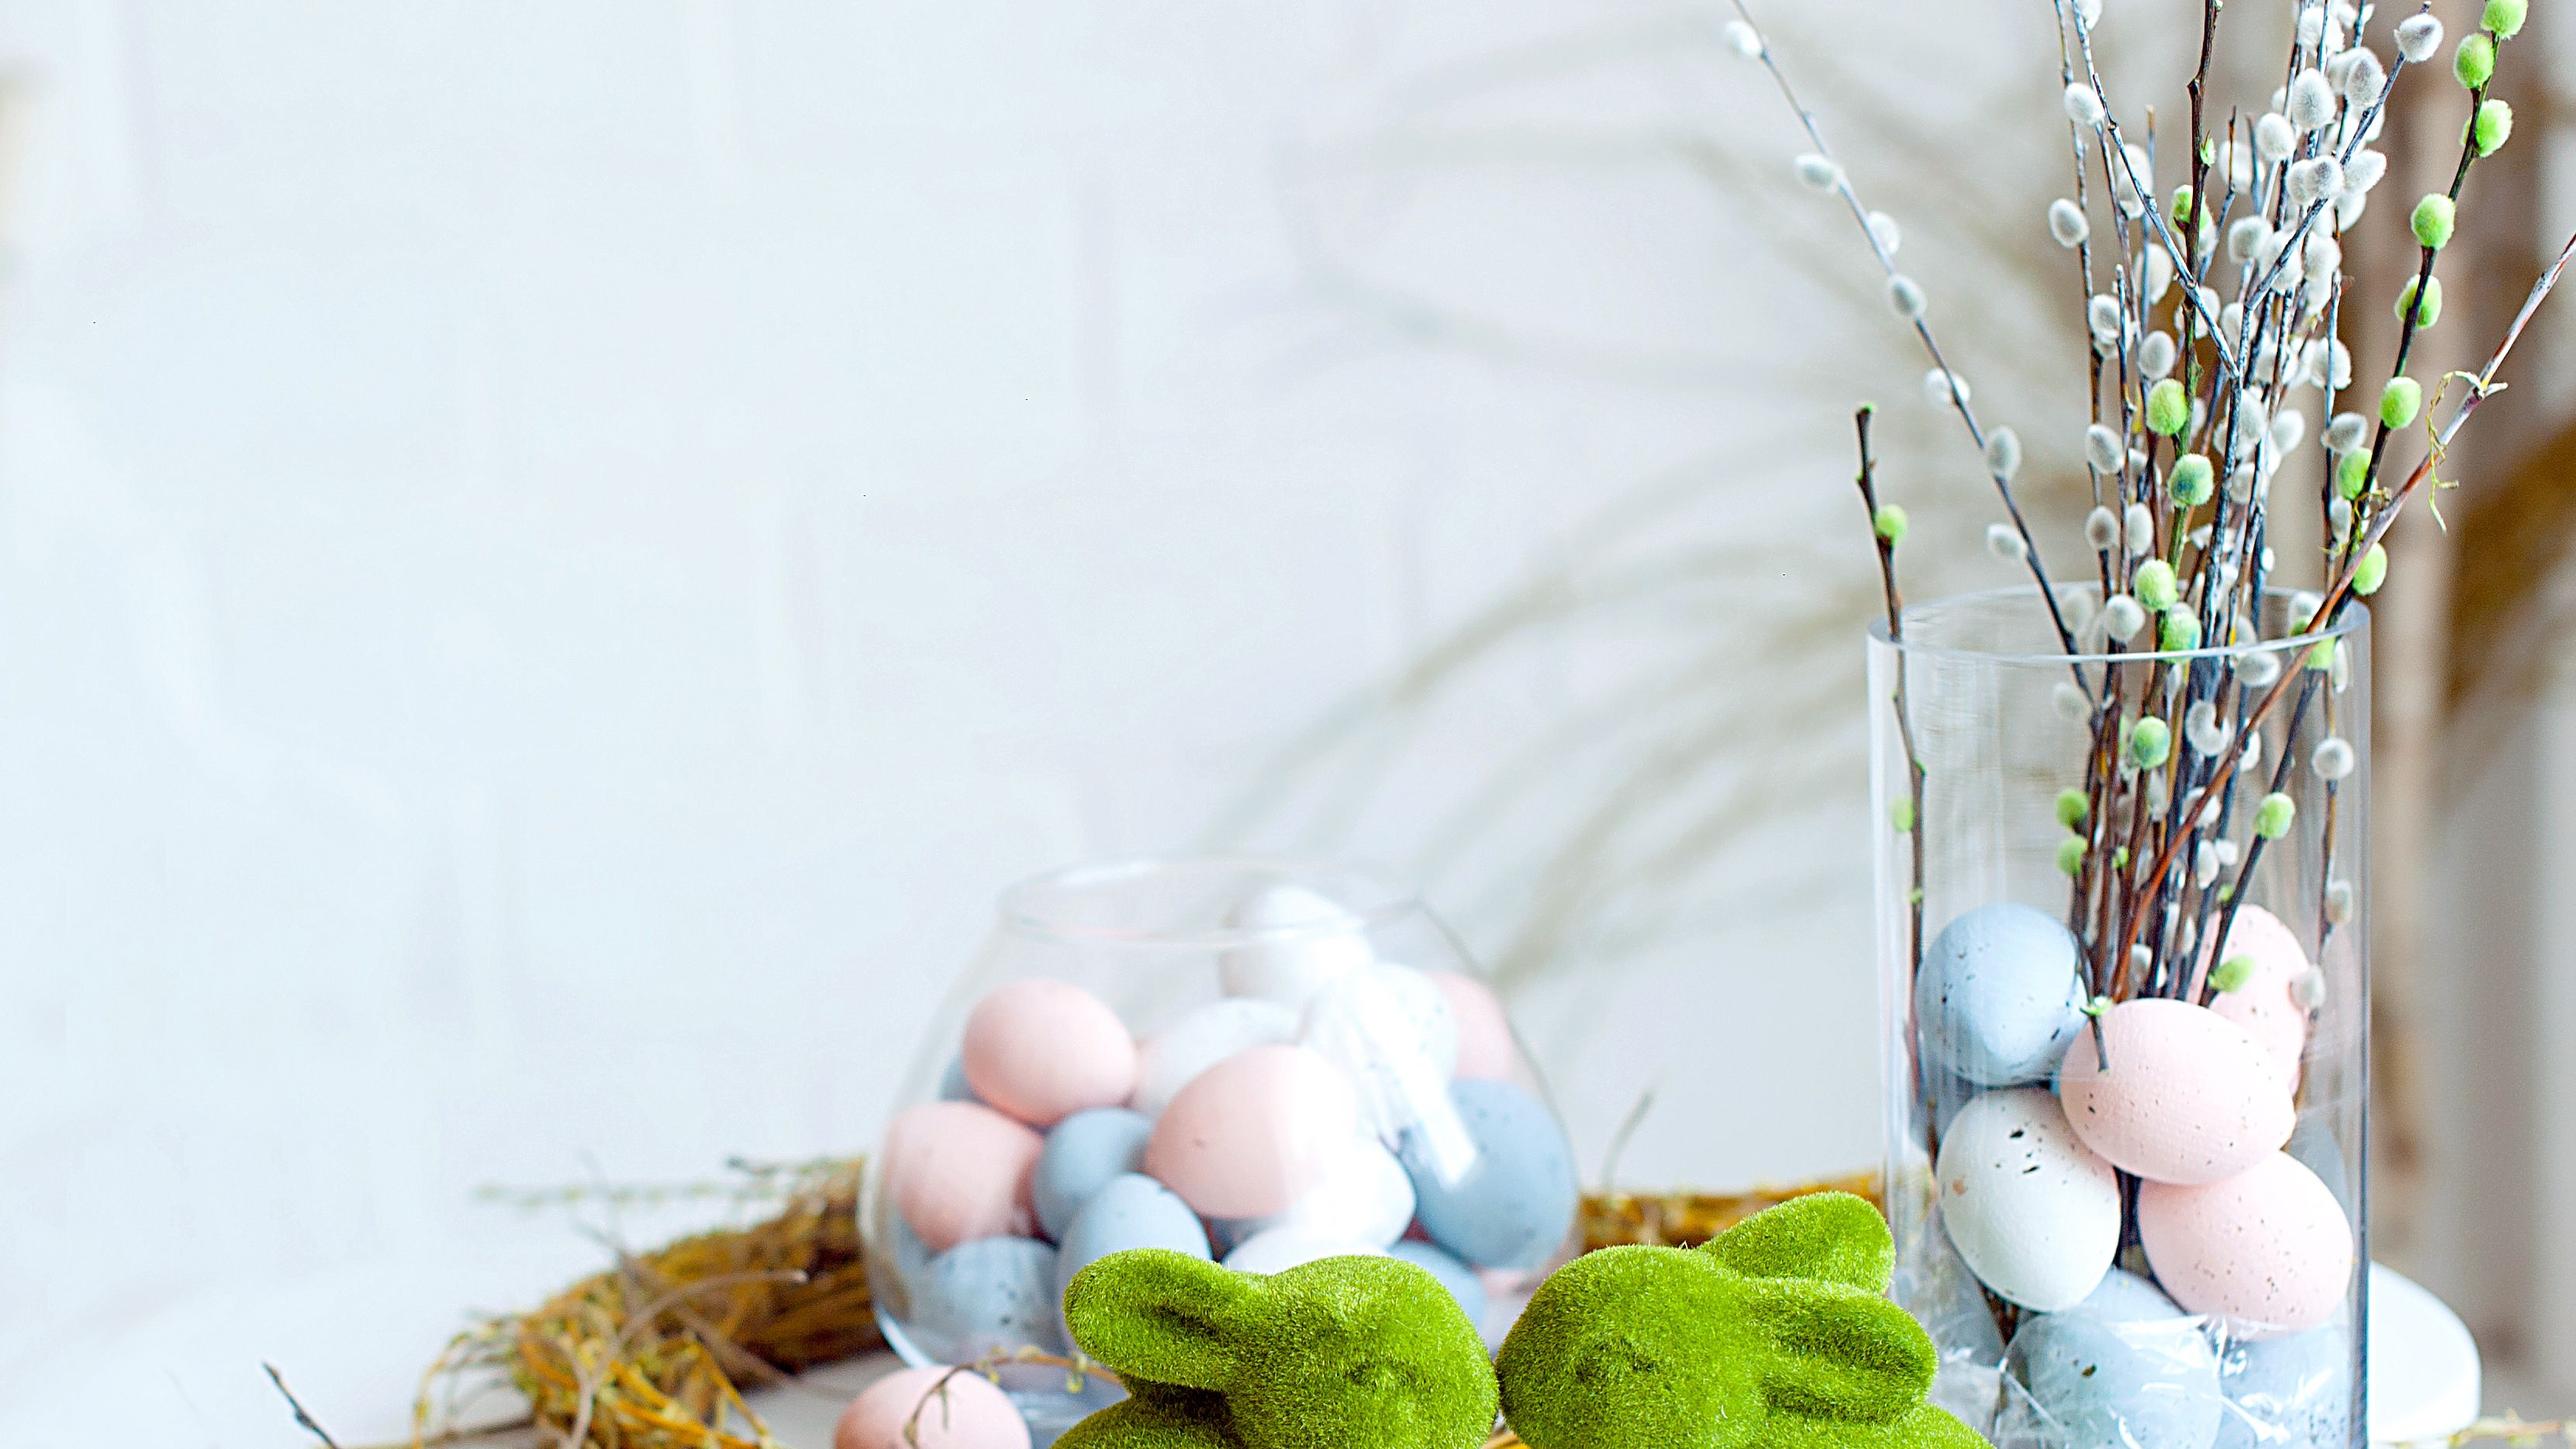 32 Cute Christian Easter Gifts for Toddlers - Christ Centered Holidays